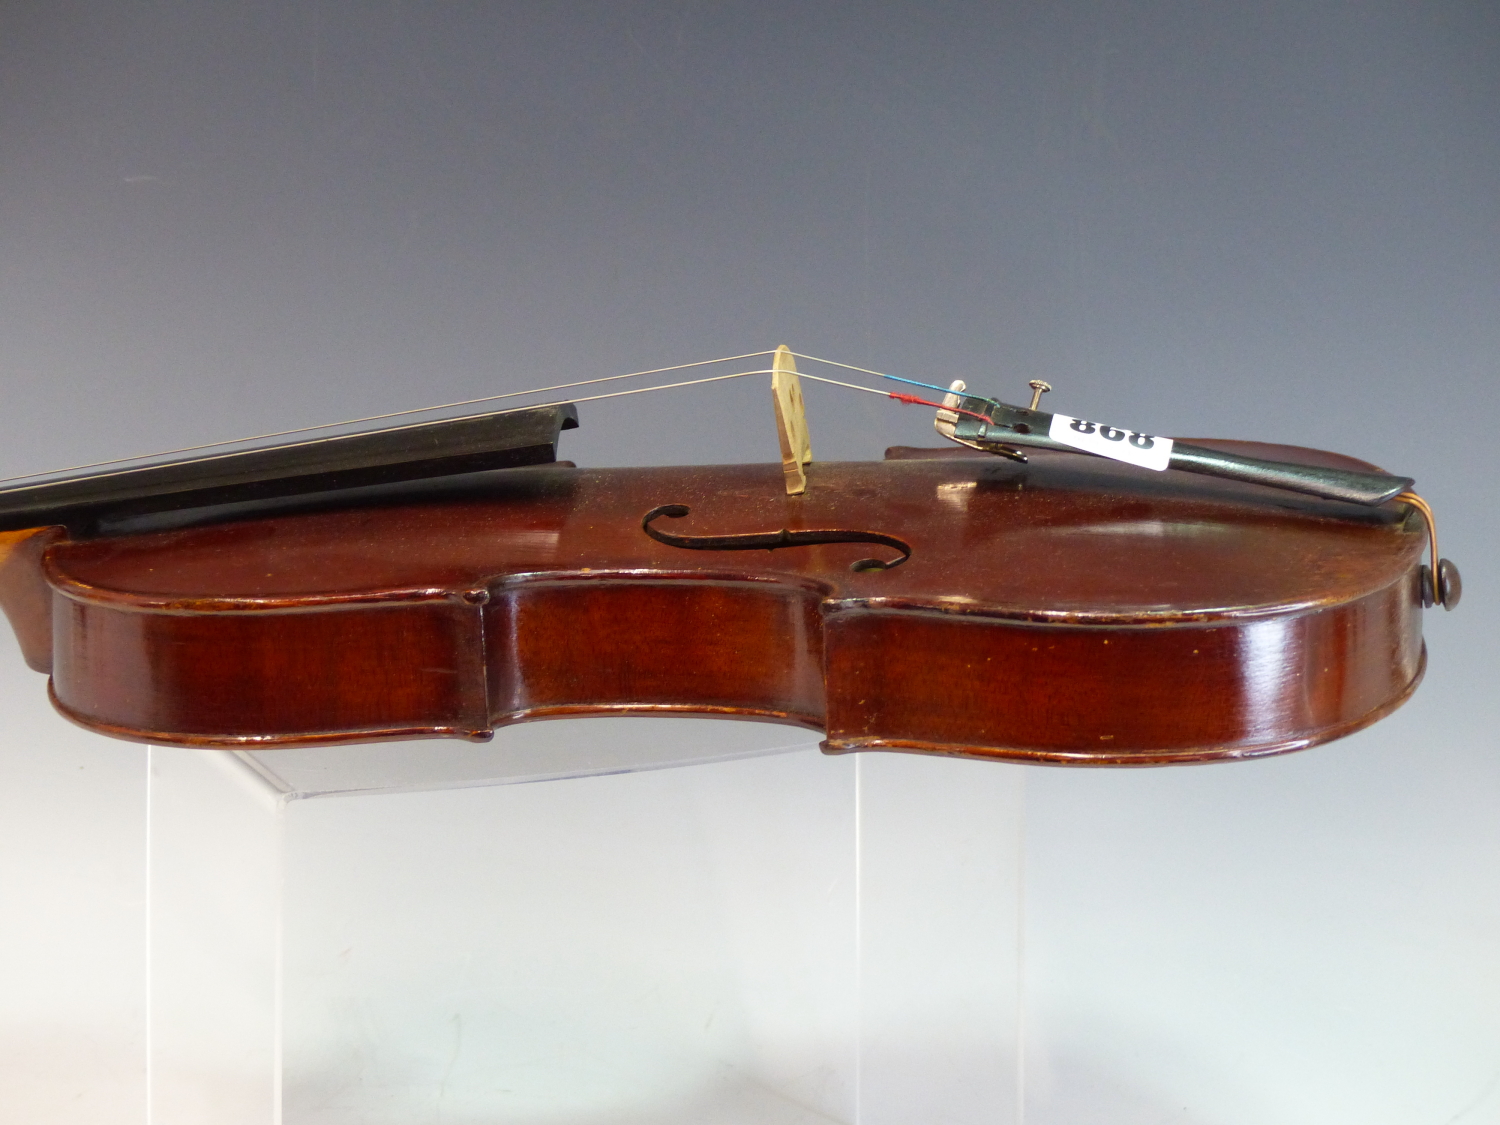 A 20TH CENTURY VIOLIN WITH LABEL " ANTONIUS STRADIUARIUS CREMONENSIS". CASED WITH A SILVER PLATE - Image 5 of 19